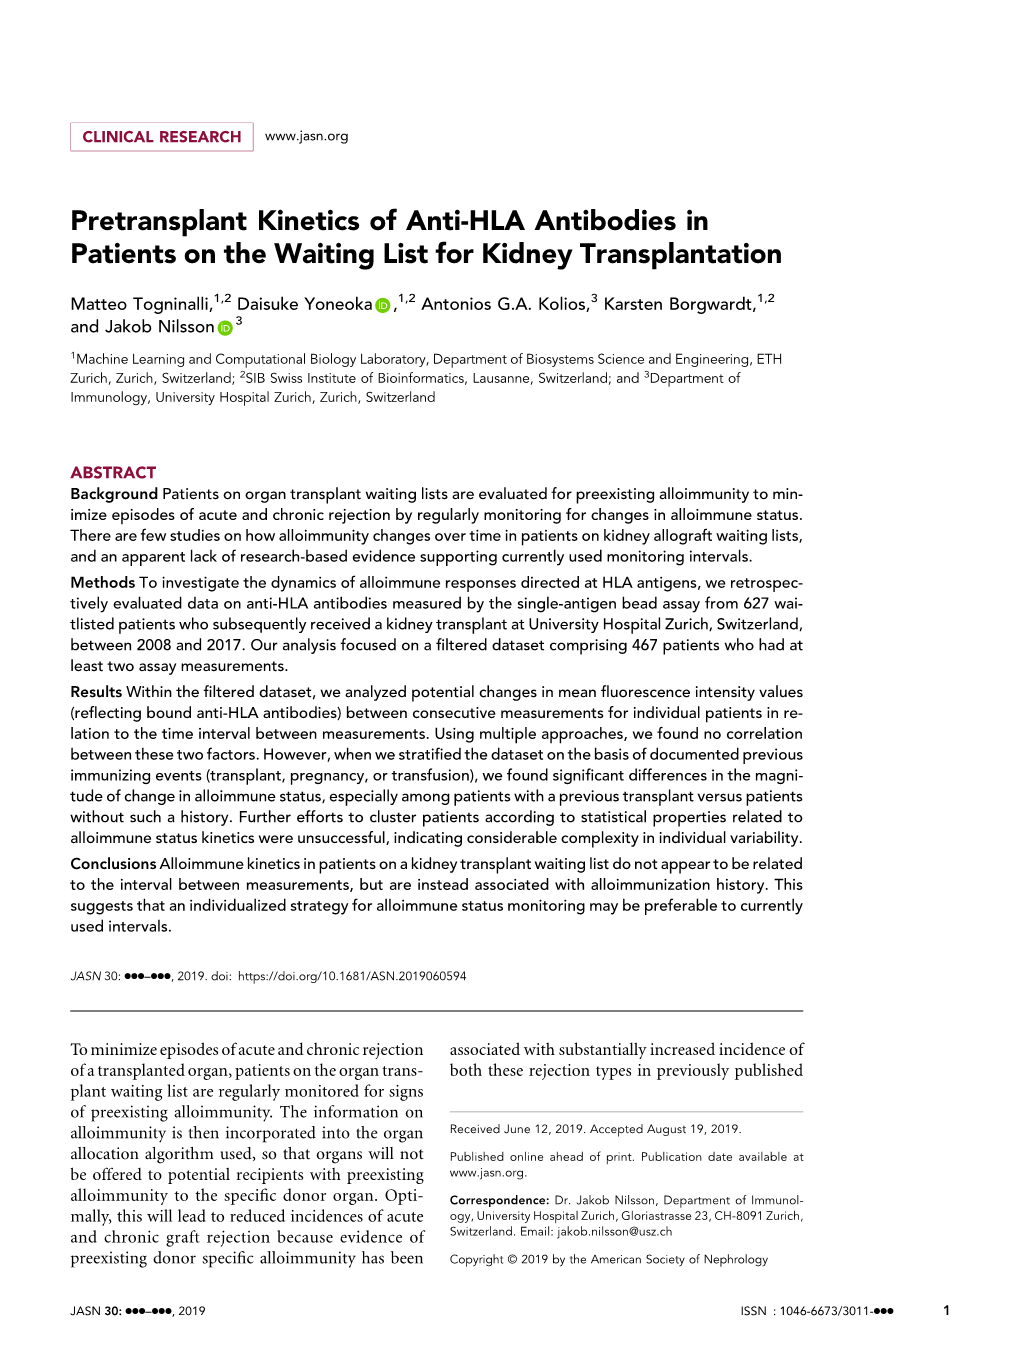 Pretransplant Kinetics of Anti-HLA Antibodies in Patients on the Waiting List for Kidney Transplantation